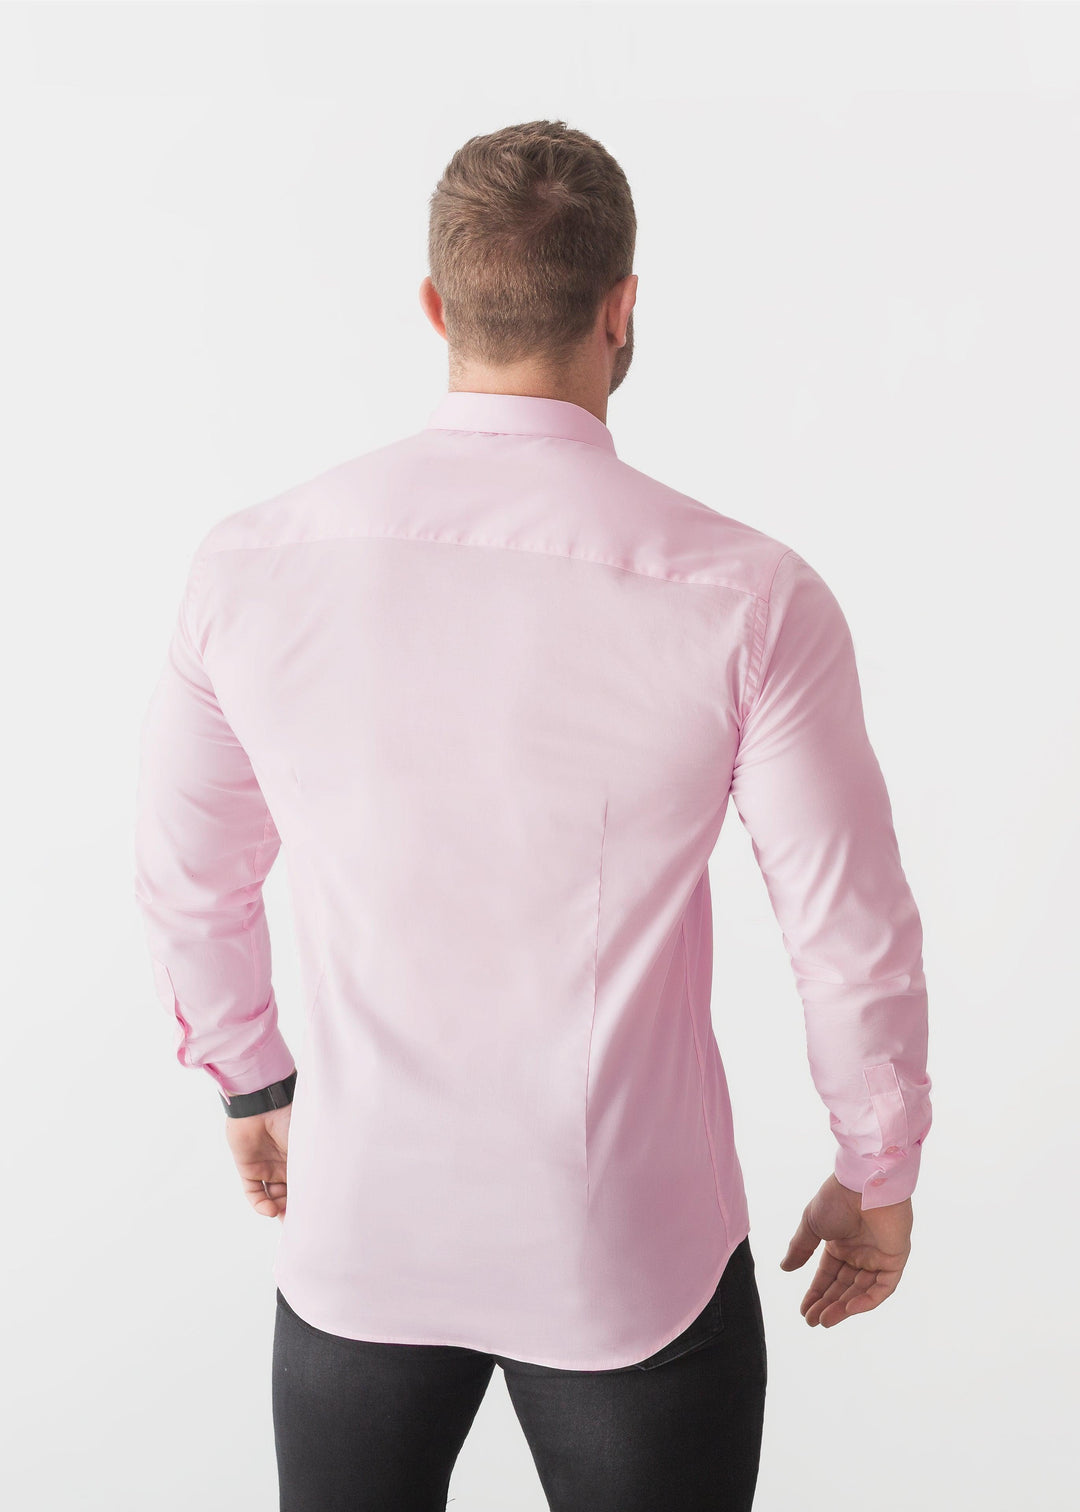 Pink Tapered Fit Shirt For Men Back. A Proportionally Fitted and Pink Muscle Fit Shirt. Ideal for bodybuilders.